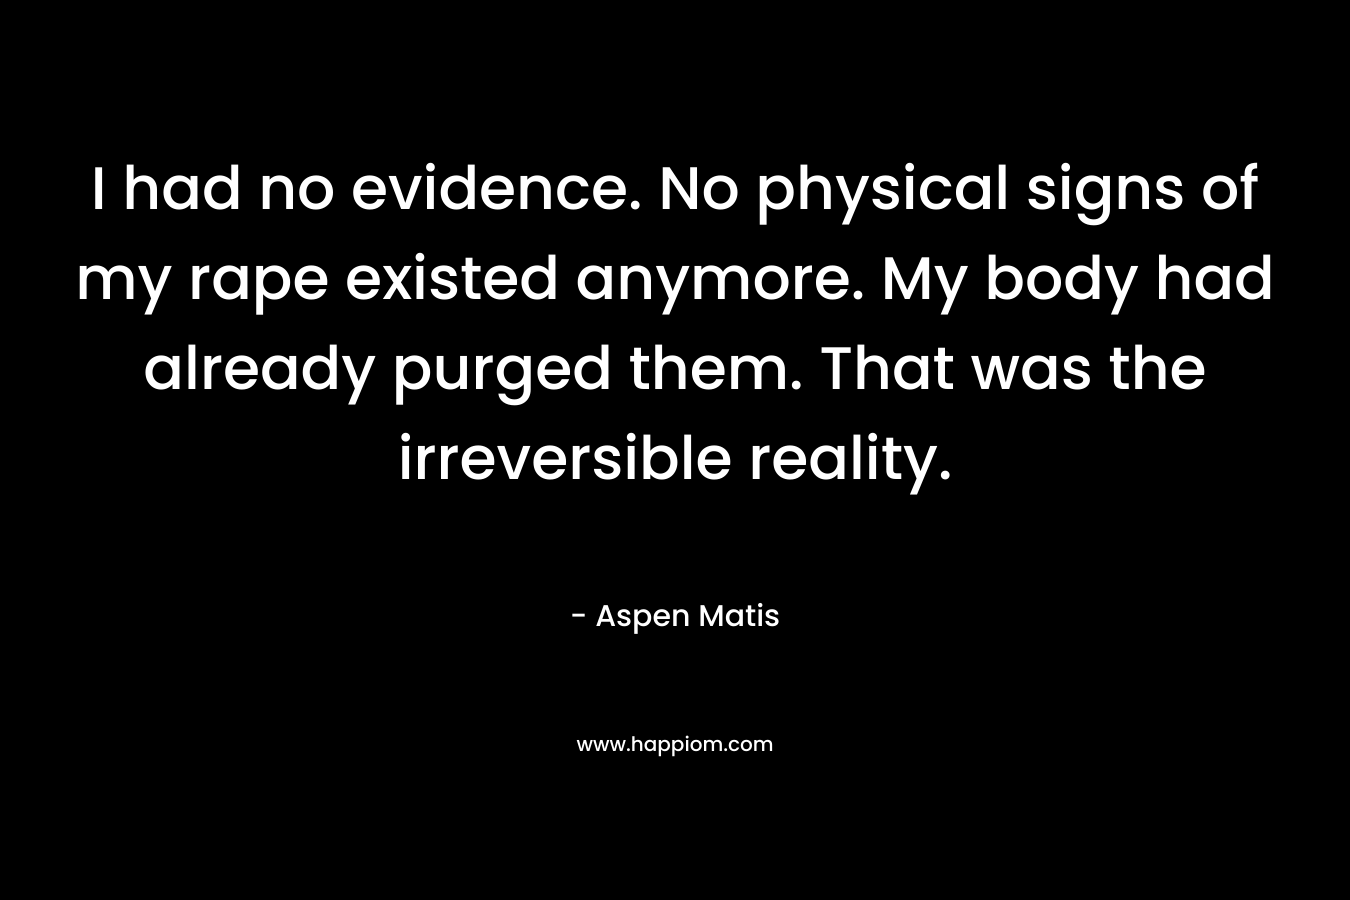 I had no evidence. No physical signs of my rape existed anymore. My body had already purged them. That was the irreversible reality.